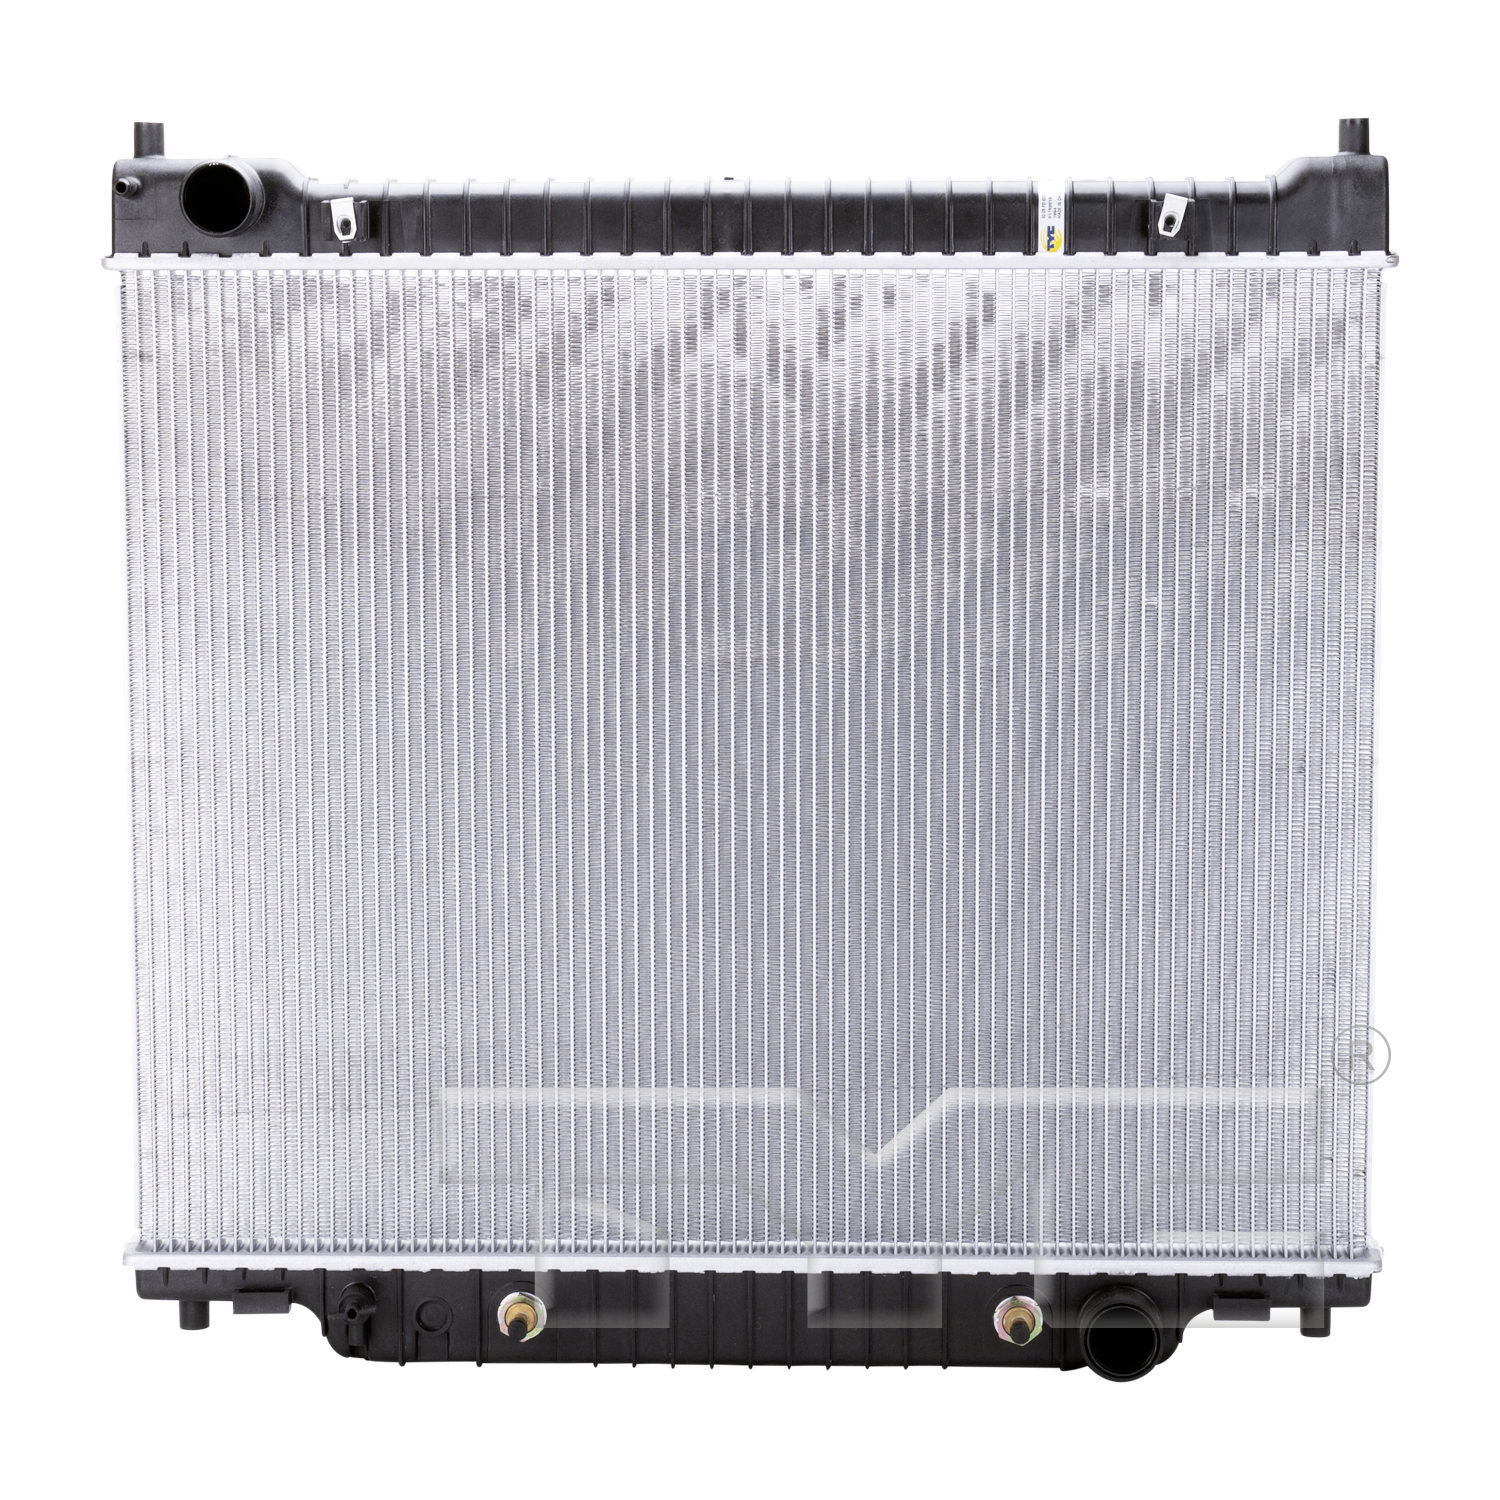 Aftermarket RADIATORS for FORD - E-250, E-250,03-06,Radiator assembly